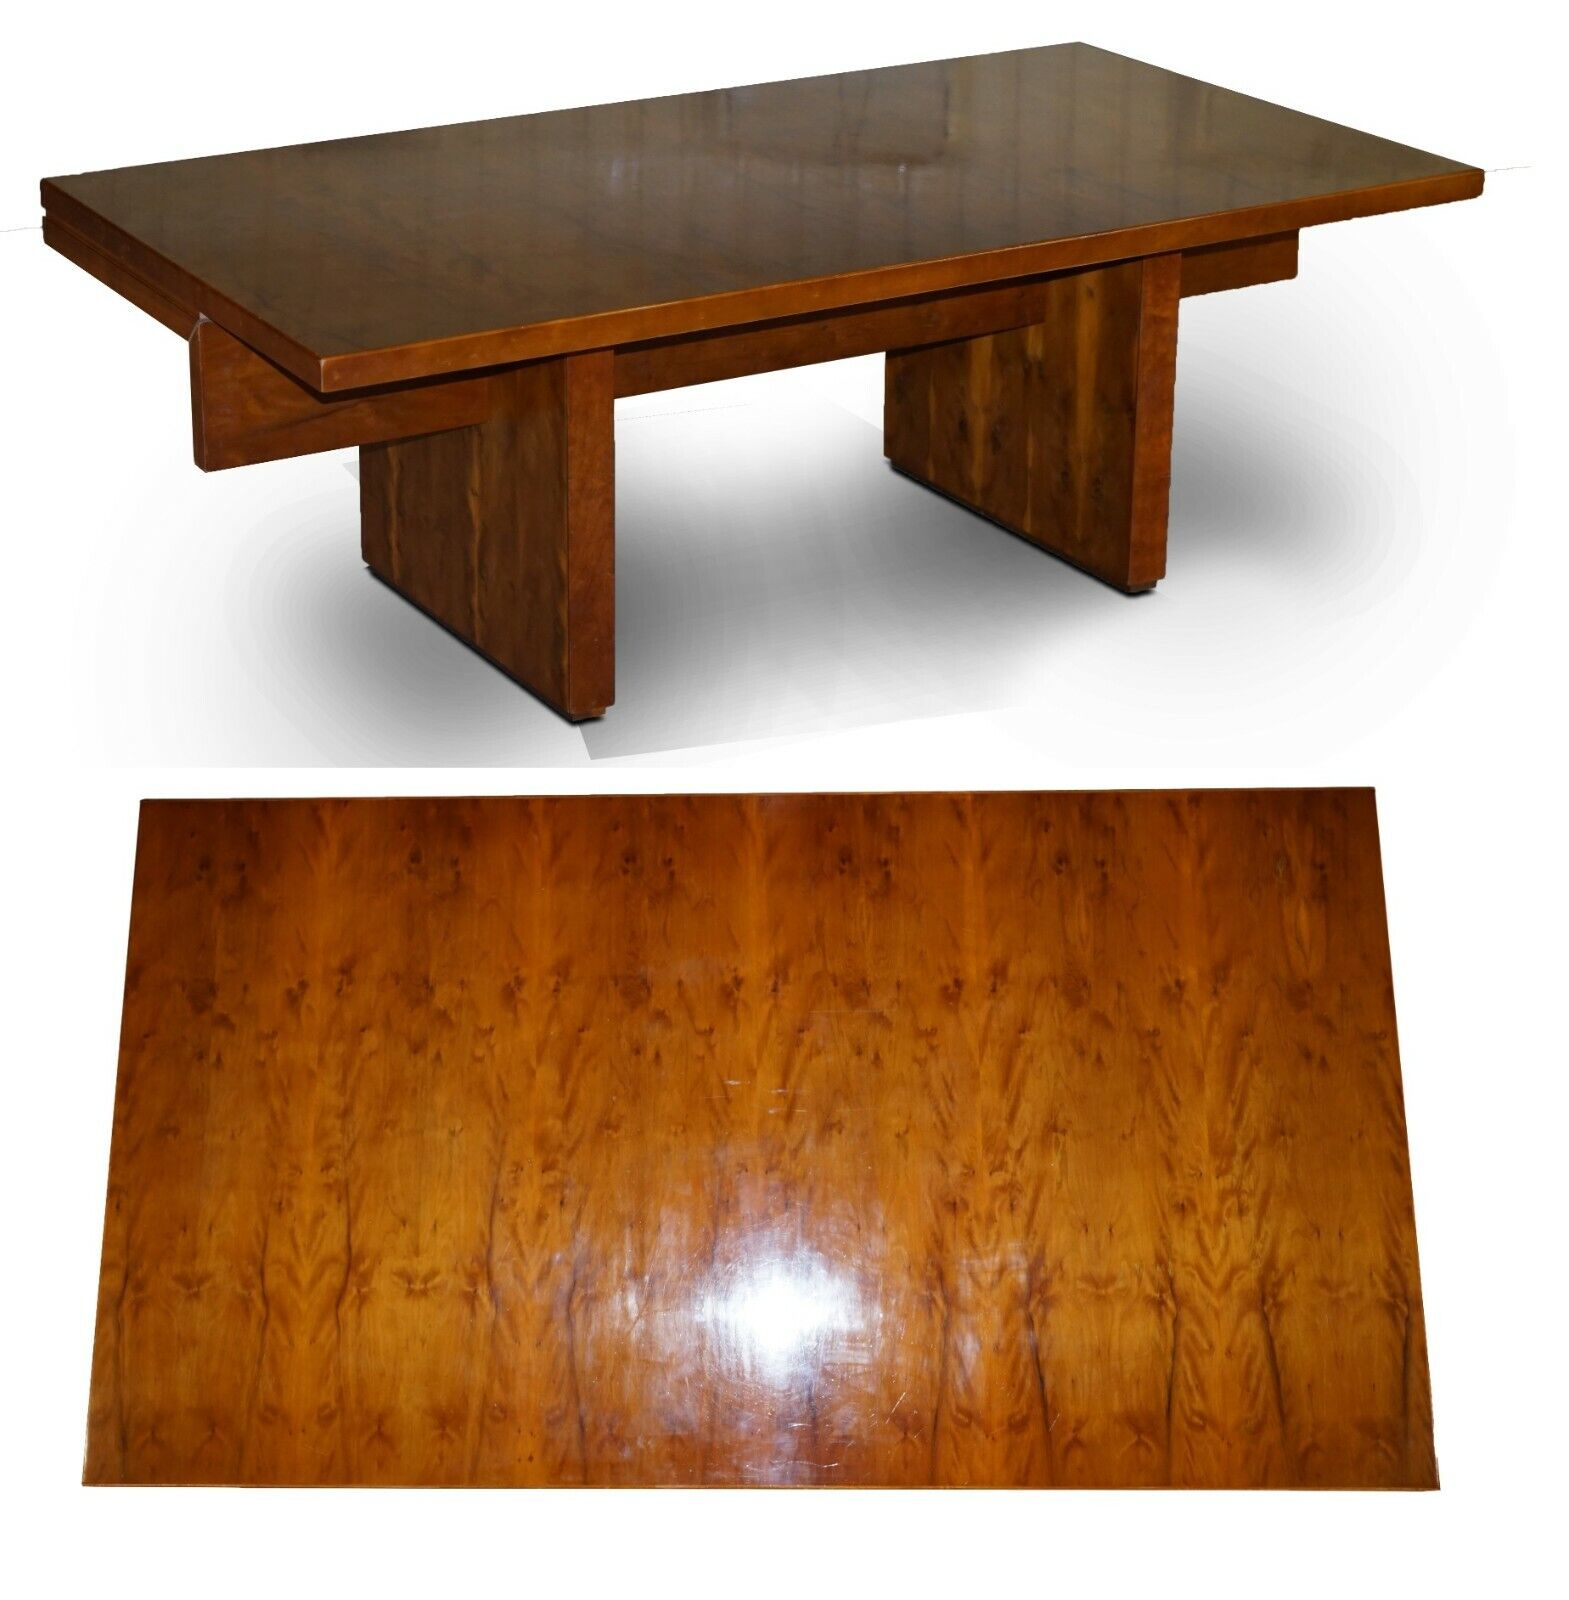 VERY LARGE BURR YEW WOOD CONTEMPORY DESIGNER OFFICE DESK LOVELY TIMBER PATINA